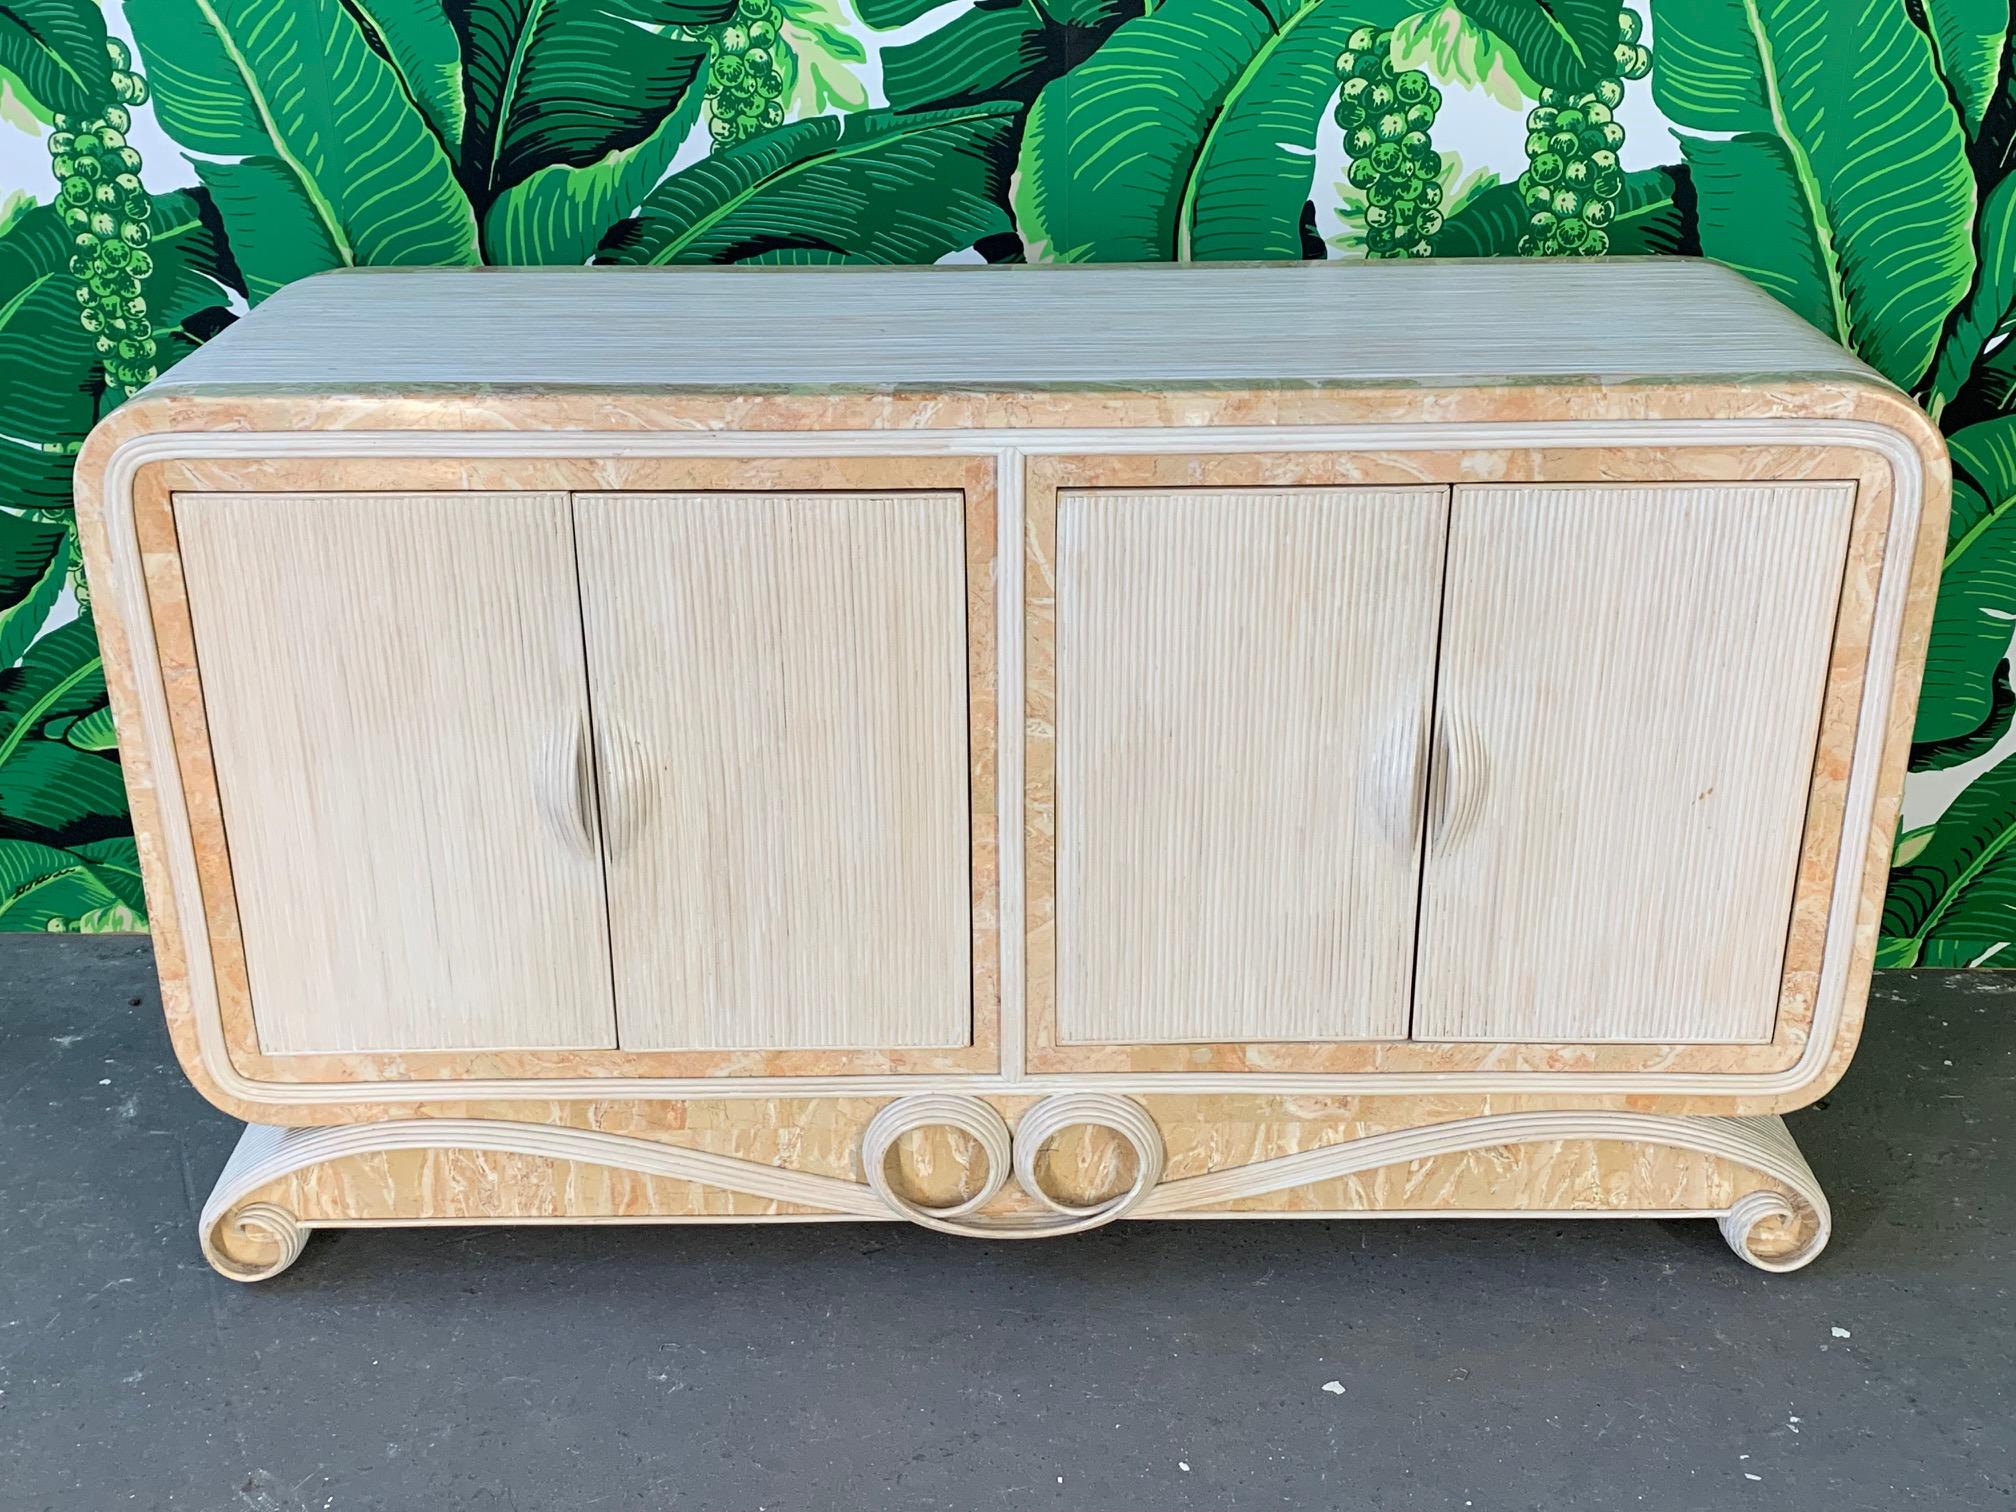 Pencil reed rattan buffet features stone inlay accents and ribbon scroll styling. Four doors reveal shelving for storage. Very good condition with only very minor imperfections consistent with age. One small crack in stone on rear side of top.